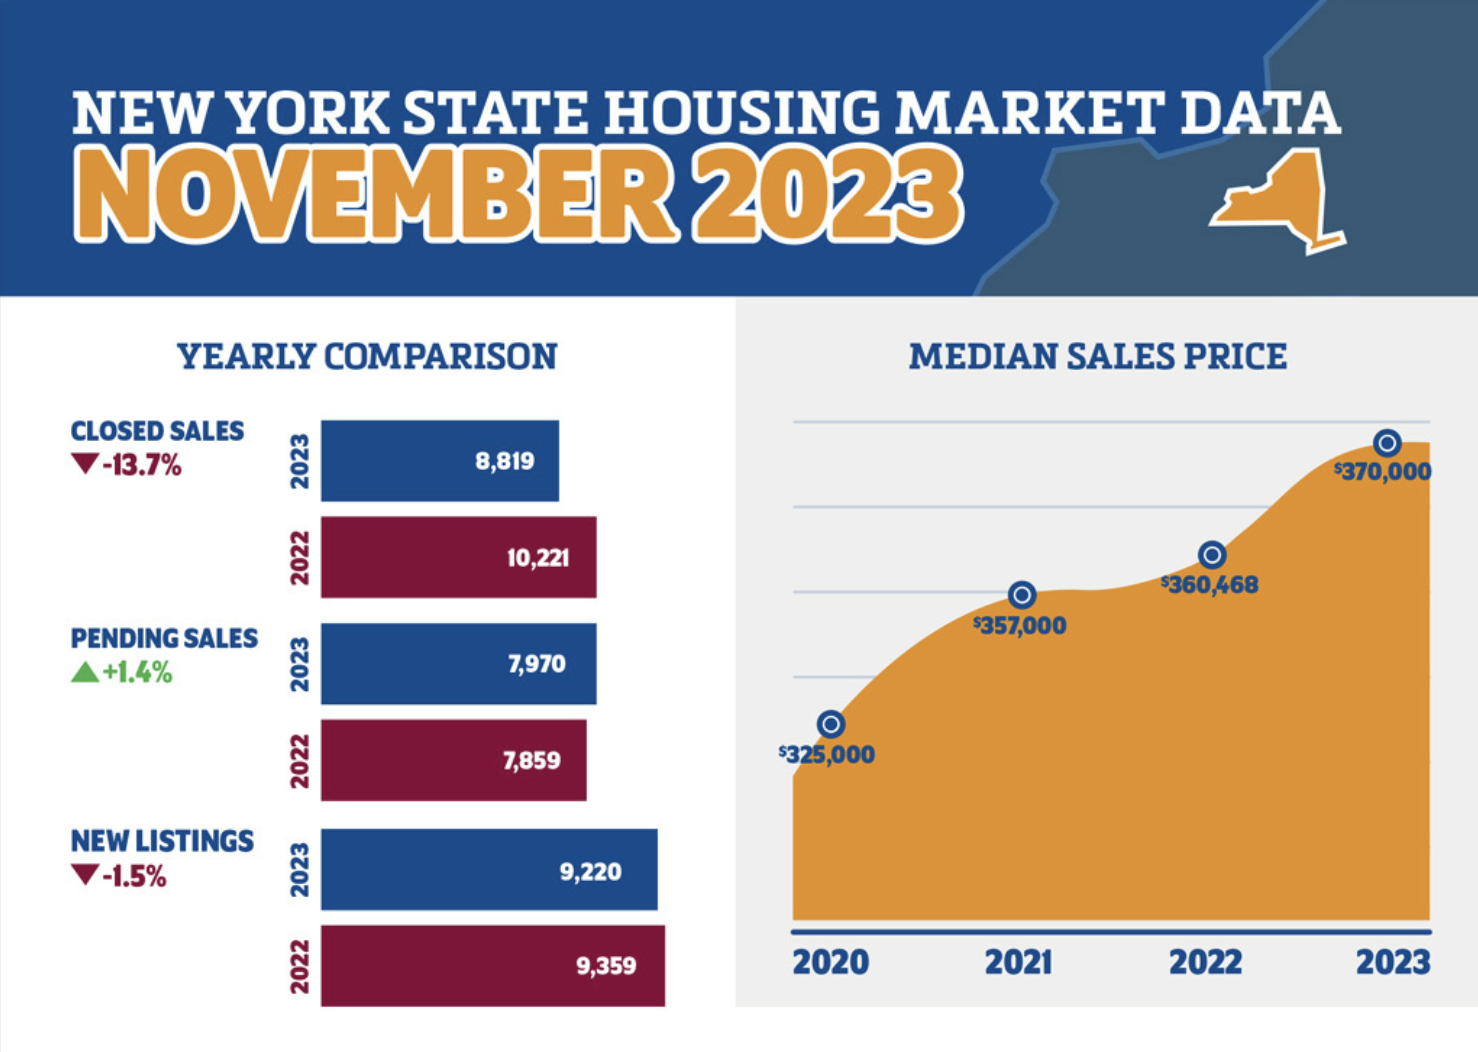 Inventory falls to all-time low, while home prices continue to climb across New York